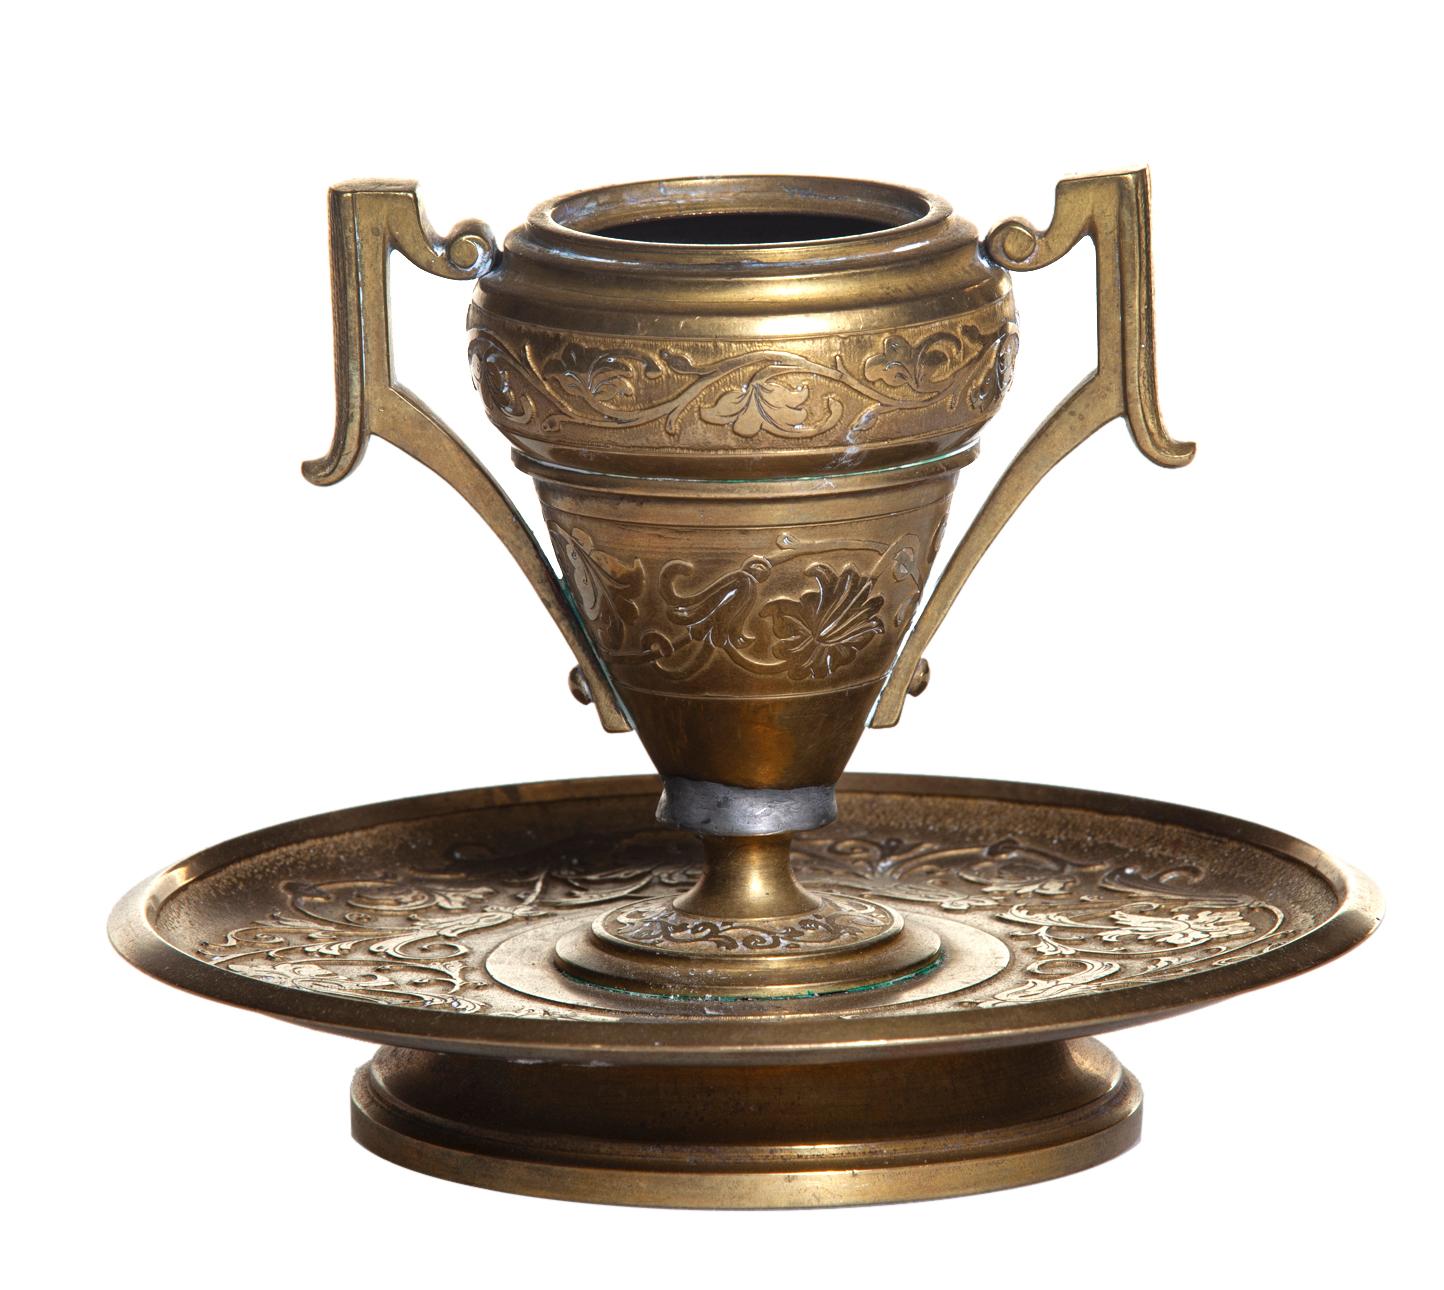 Vintage solid brass hand tooled single candleholder with two handles, sits on a footed round base.